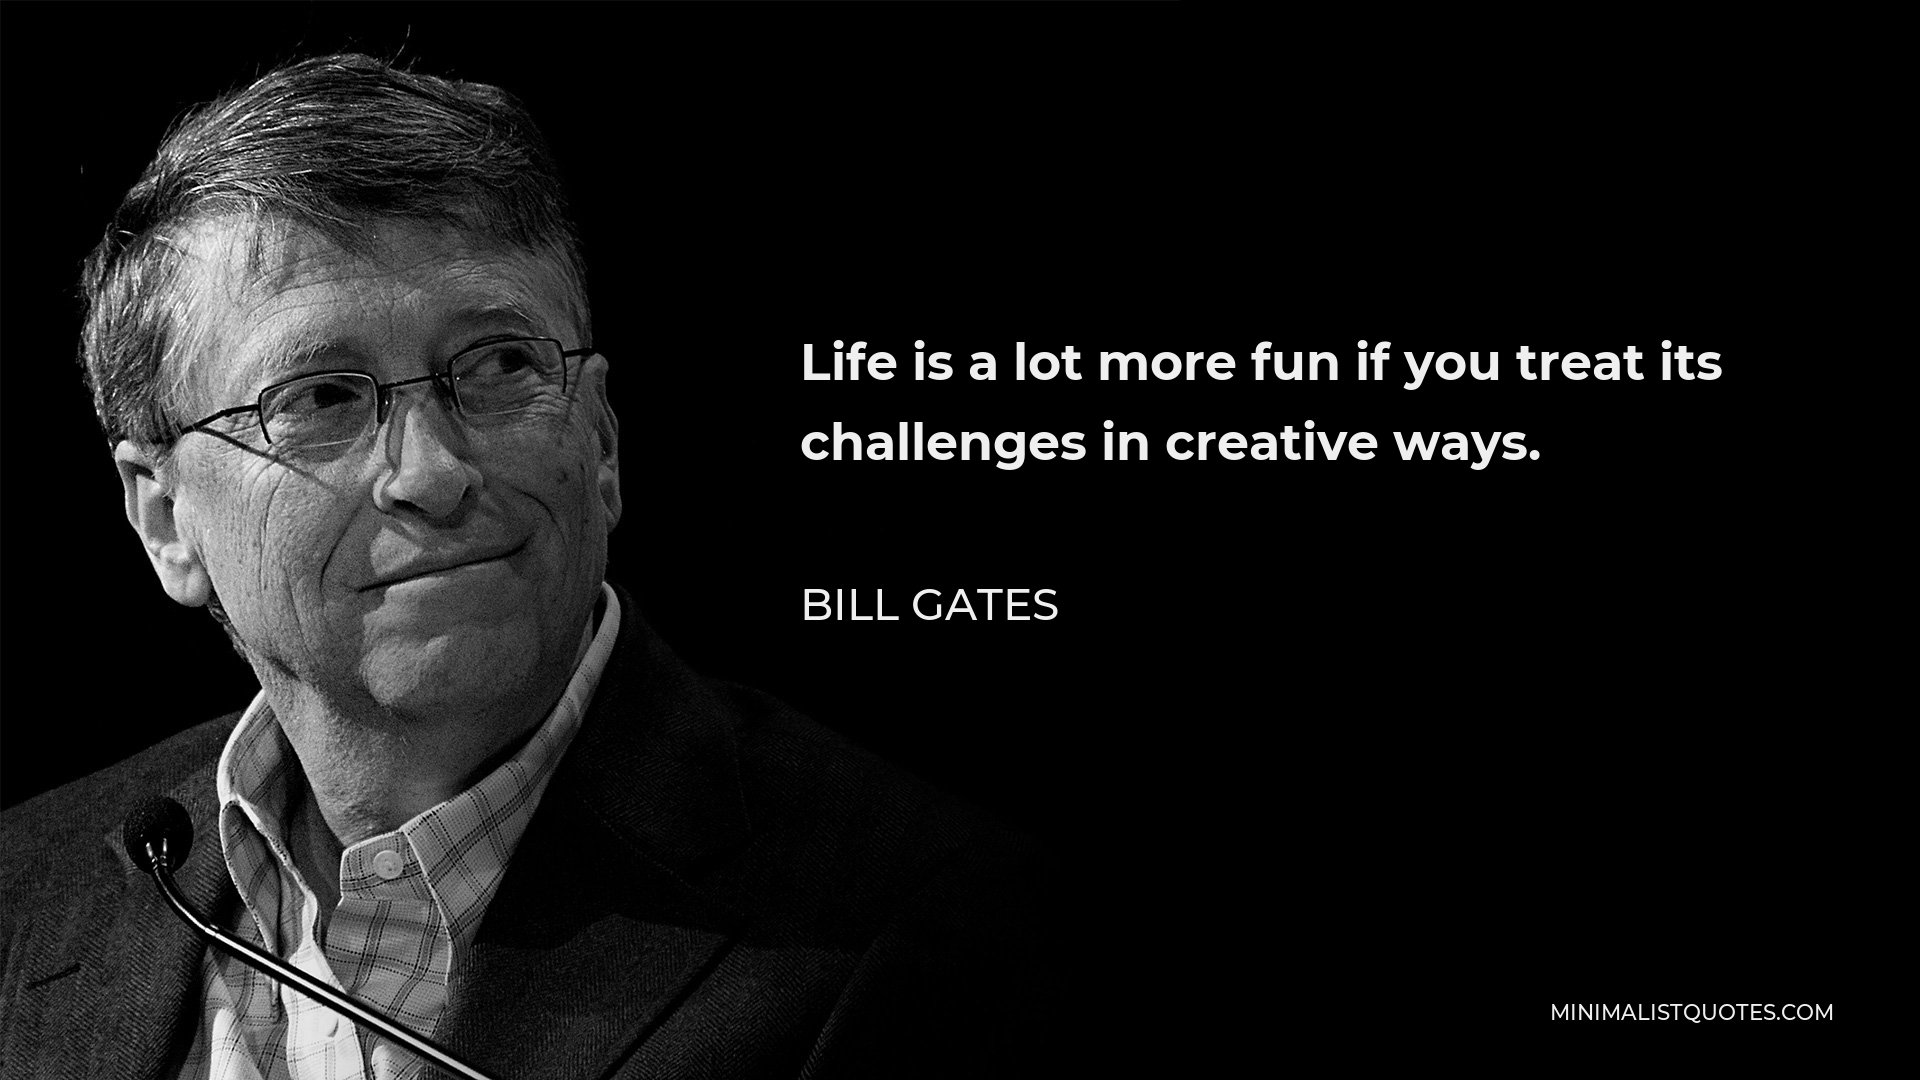 Bill Gates Quote - Life is a lot more fun if you treat its challenges in creative ways.